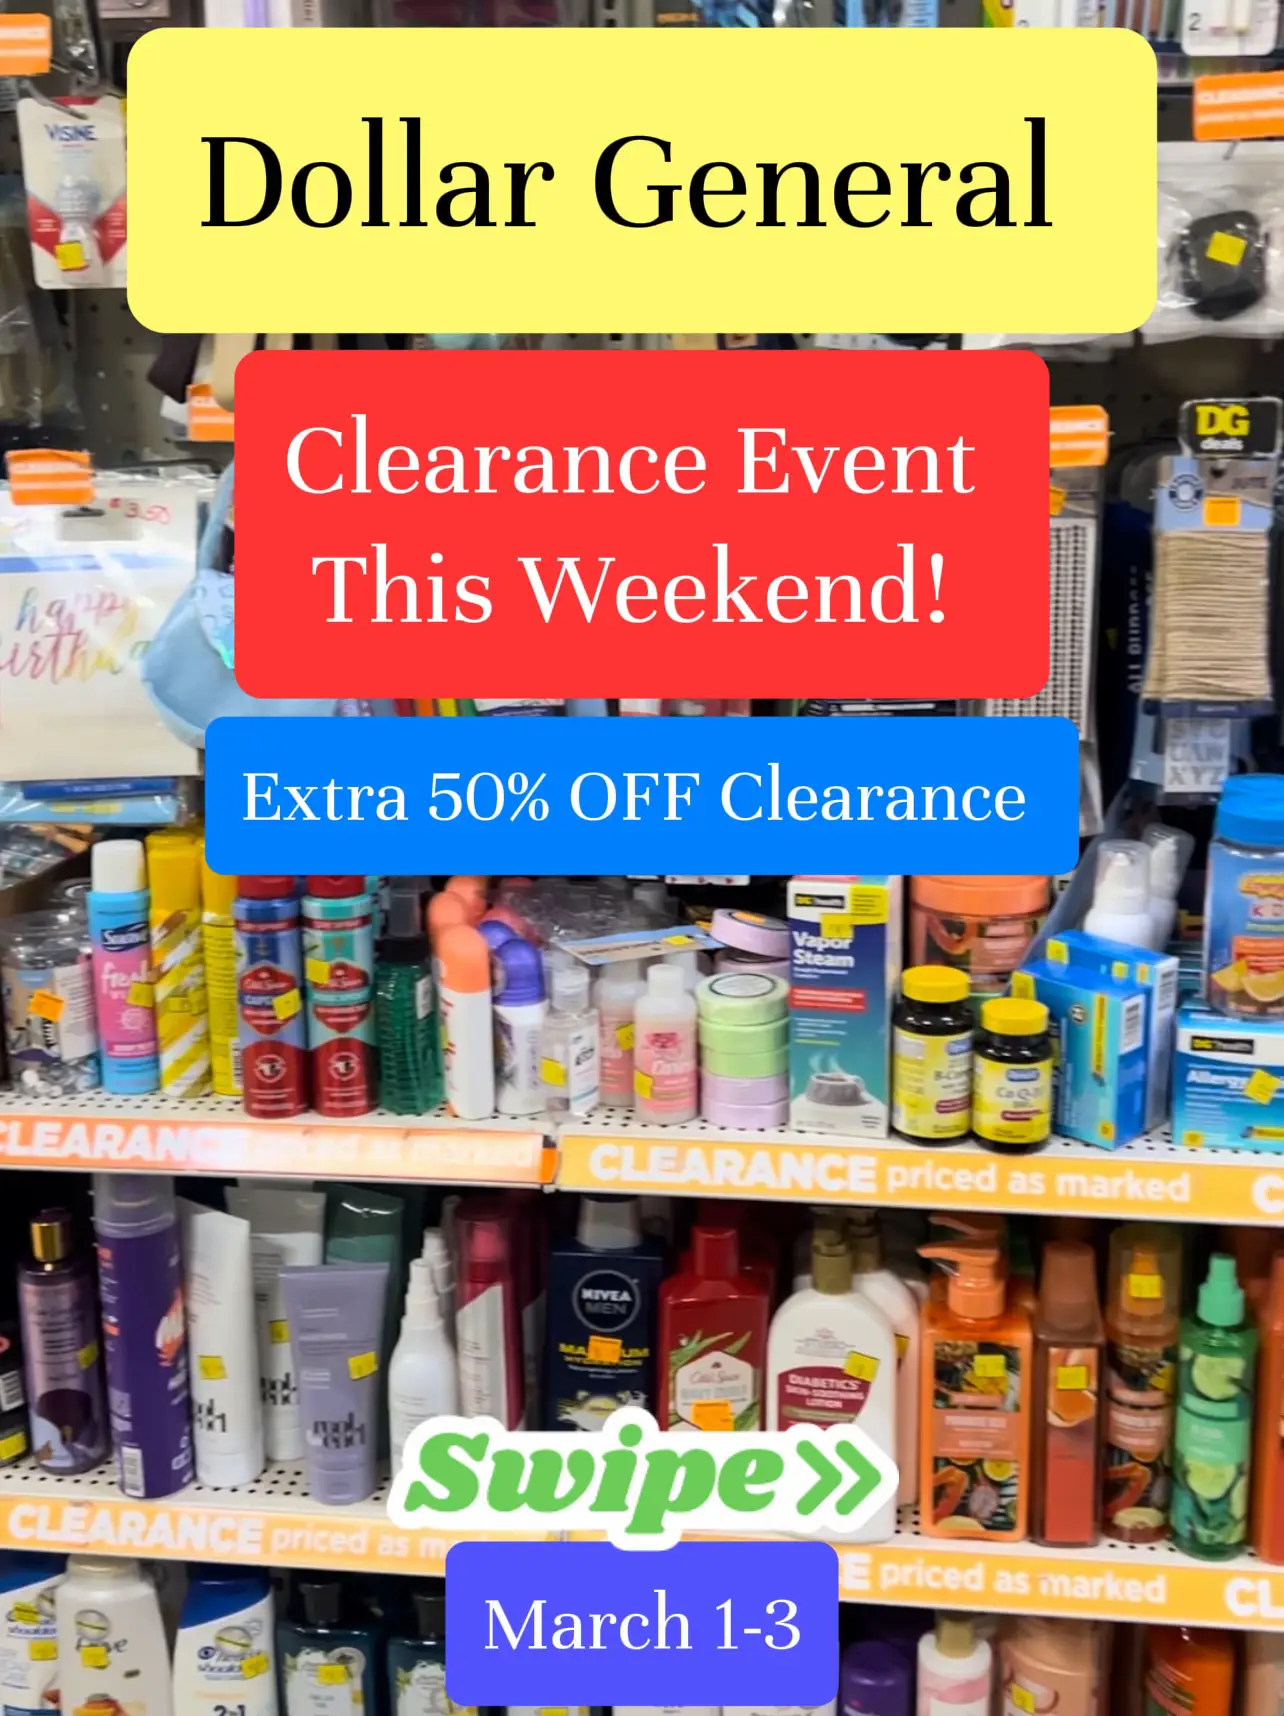 🤩WALMART NEW CLOTHING & NEW CLEARANCE‼️ AS LOW AS $1 $4 $5😮WALMART  CLEARANCE SALE